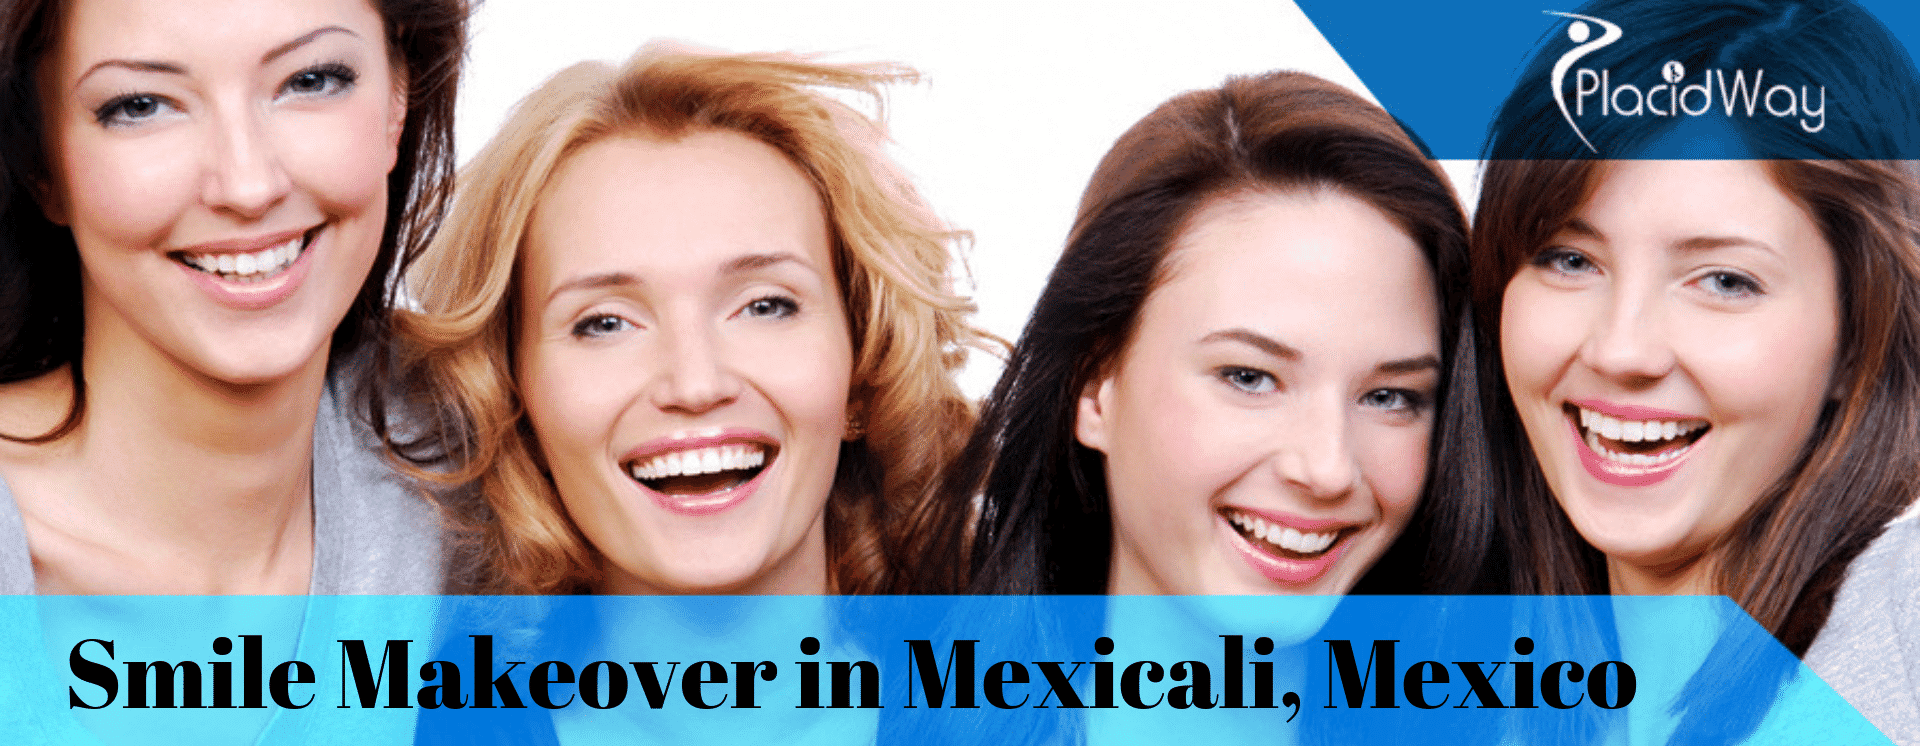 Smile Makeover in Mexicali, Mexico